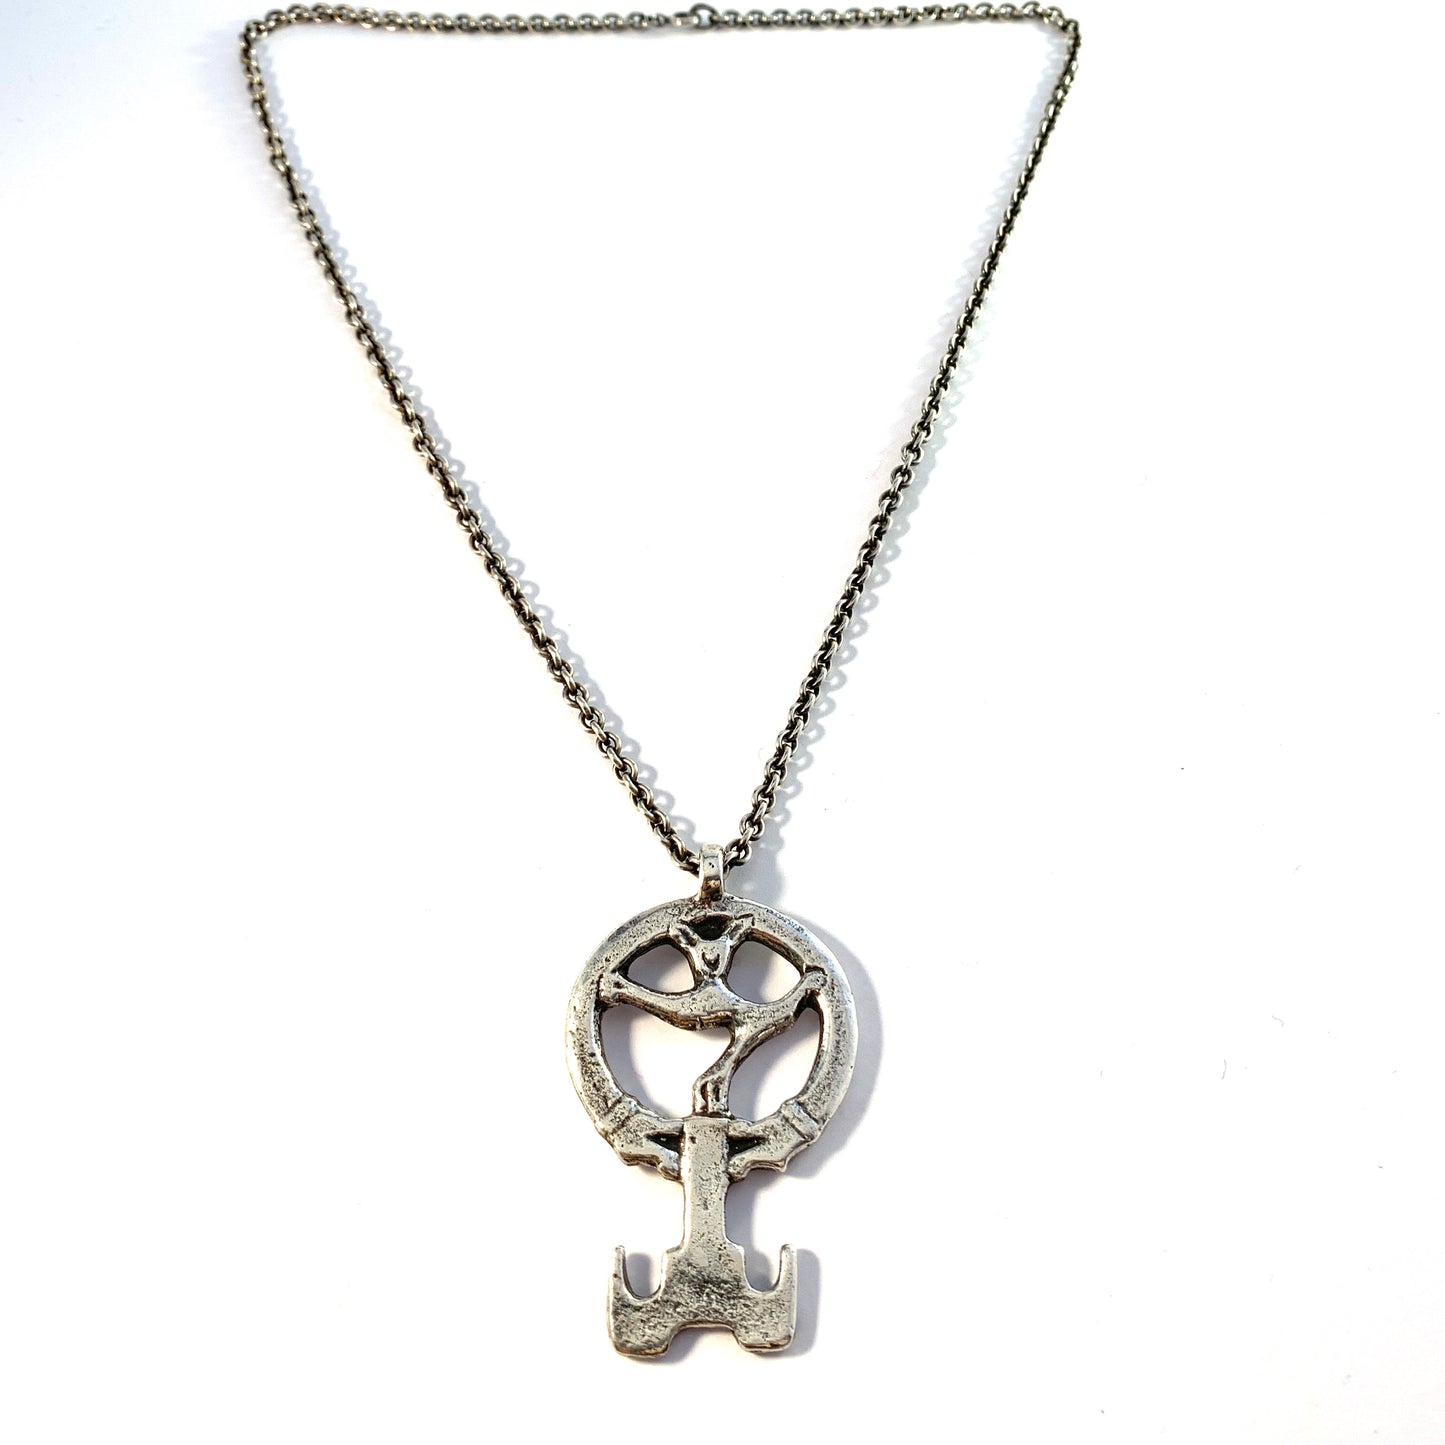 W A Bolin, Sweden 1970 Solid Silver Viking Copy Key to Valhalla Pendant Necklace